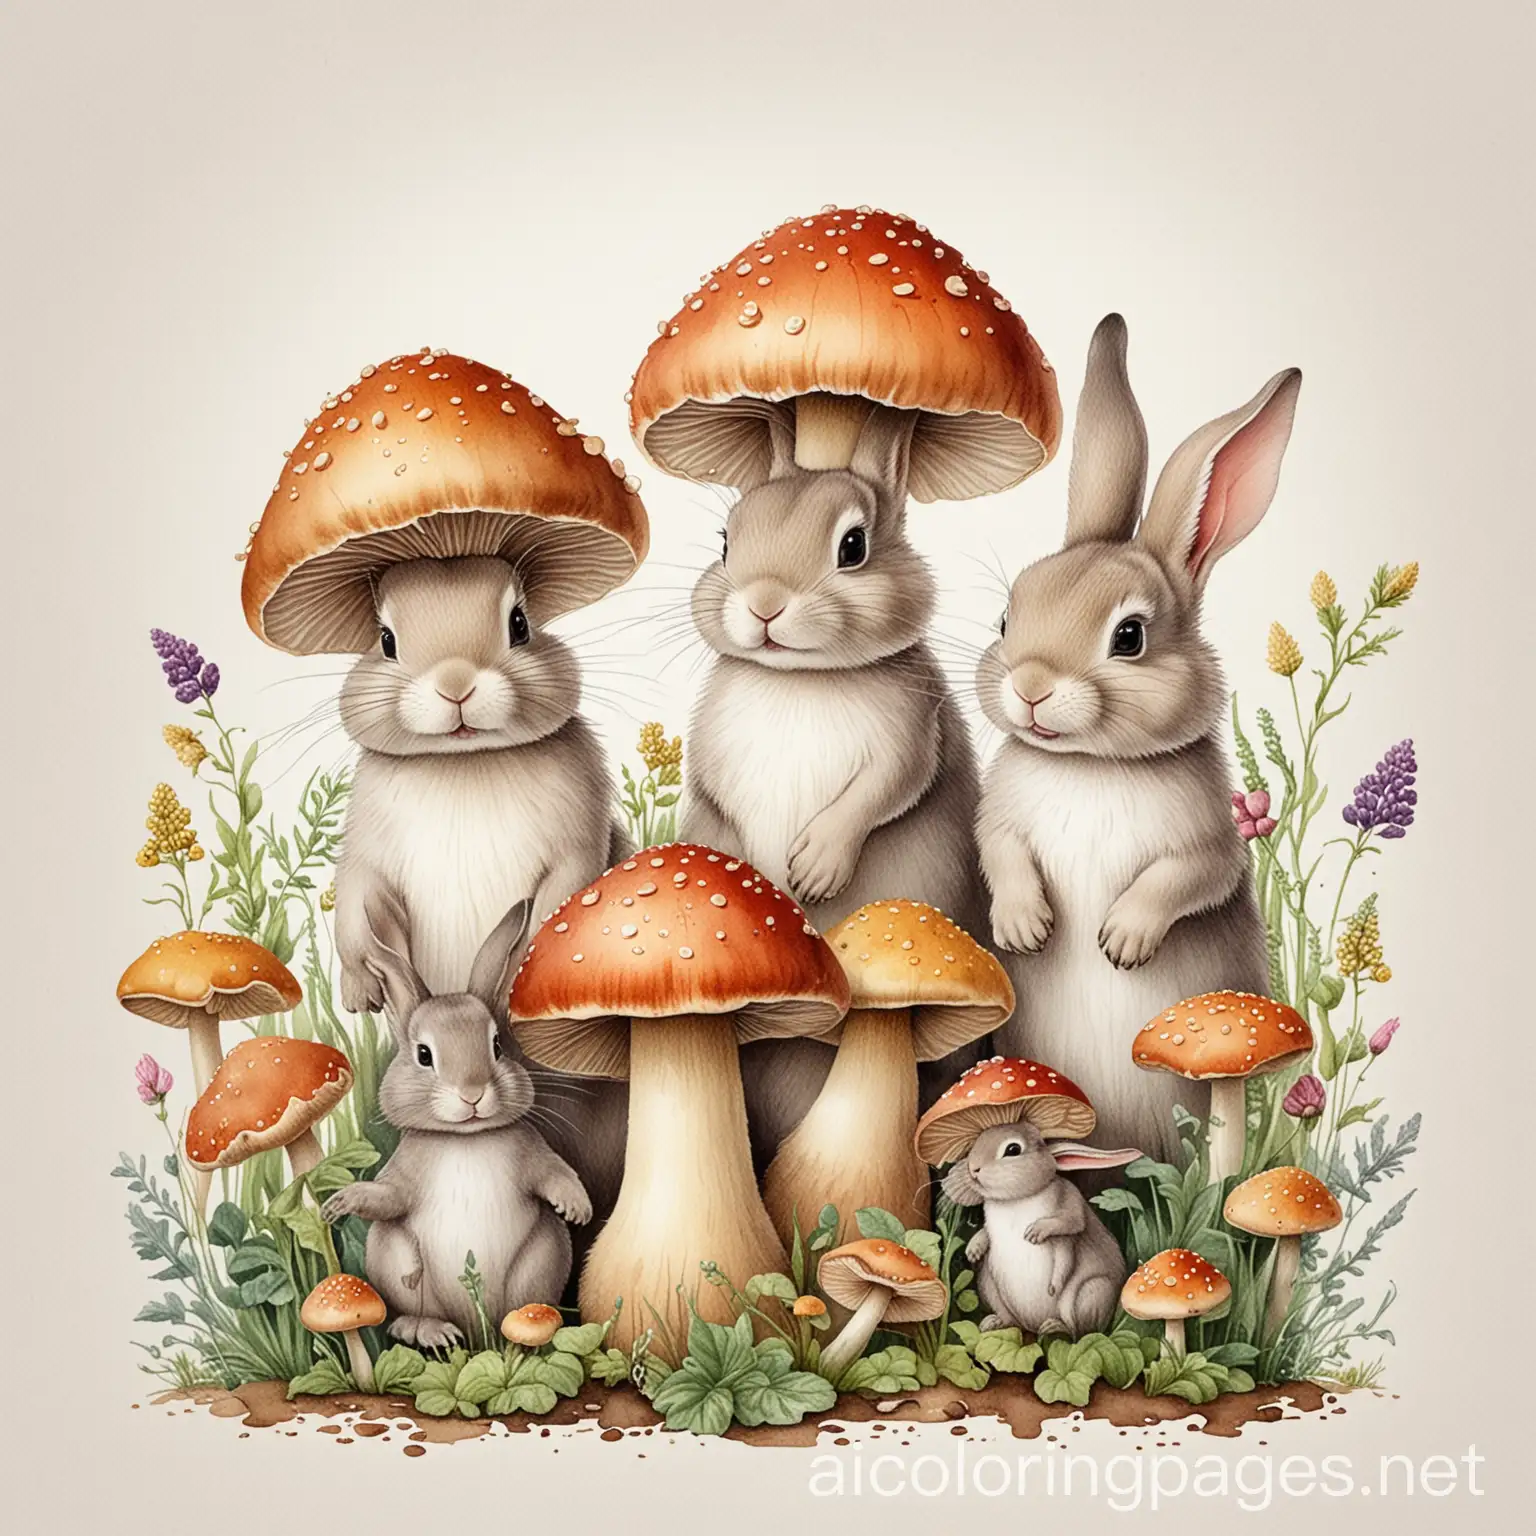 Vintage mushrooms and small and cute three bunny rabbits watercolor illustrations, Coloring Page, black and white, line art, white background, Simplicity, Ample White Space. The background of the coloring page is plain white to make it easy for young children to color within the lines. The outlines of all the subjects are easy to distinguish, making it simple for kids to color without too much difficulty